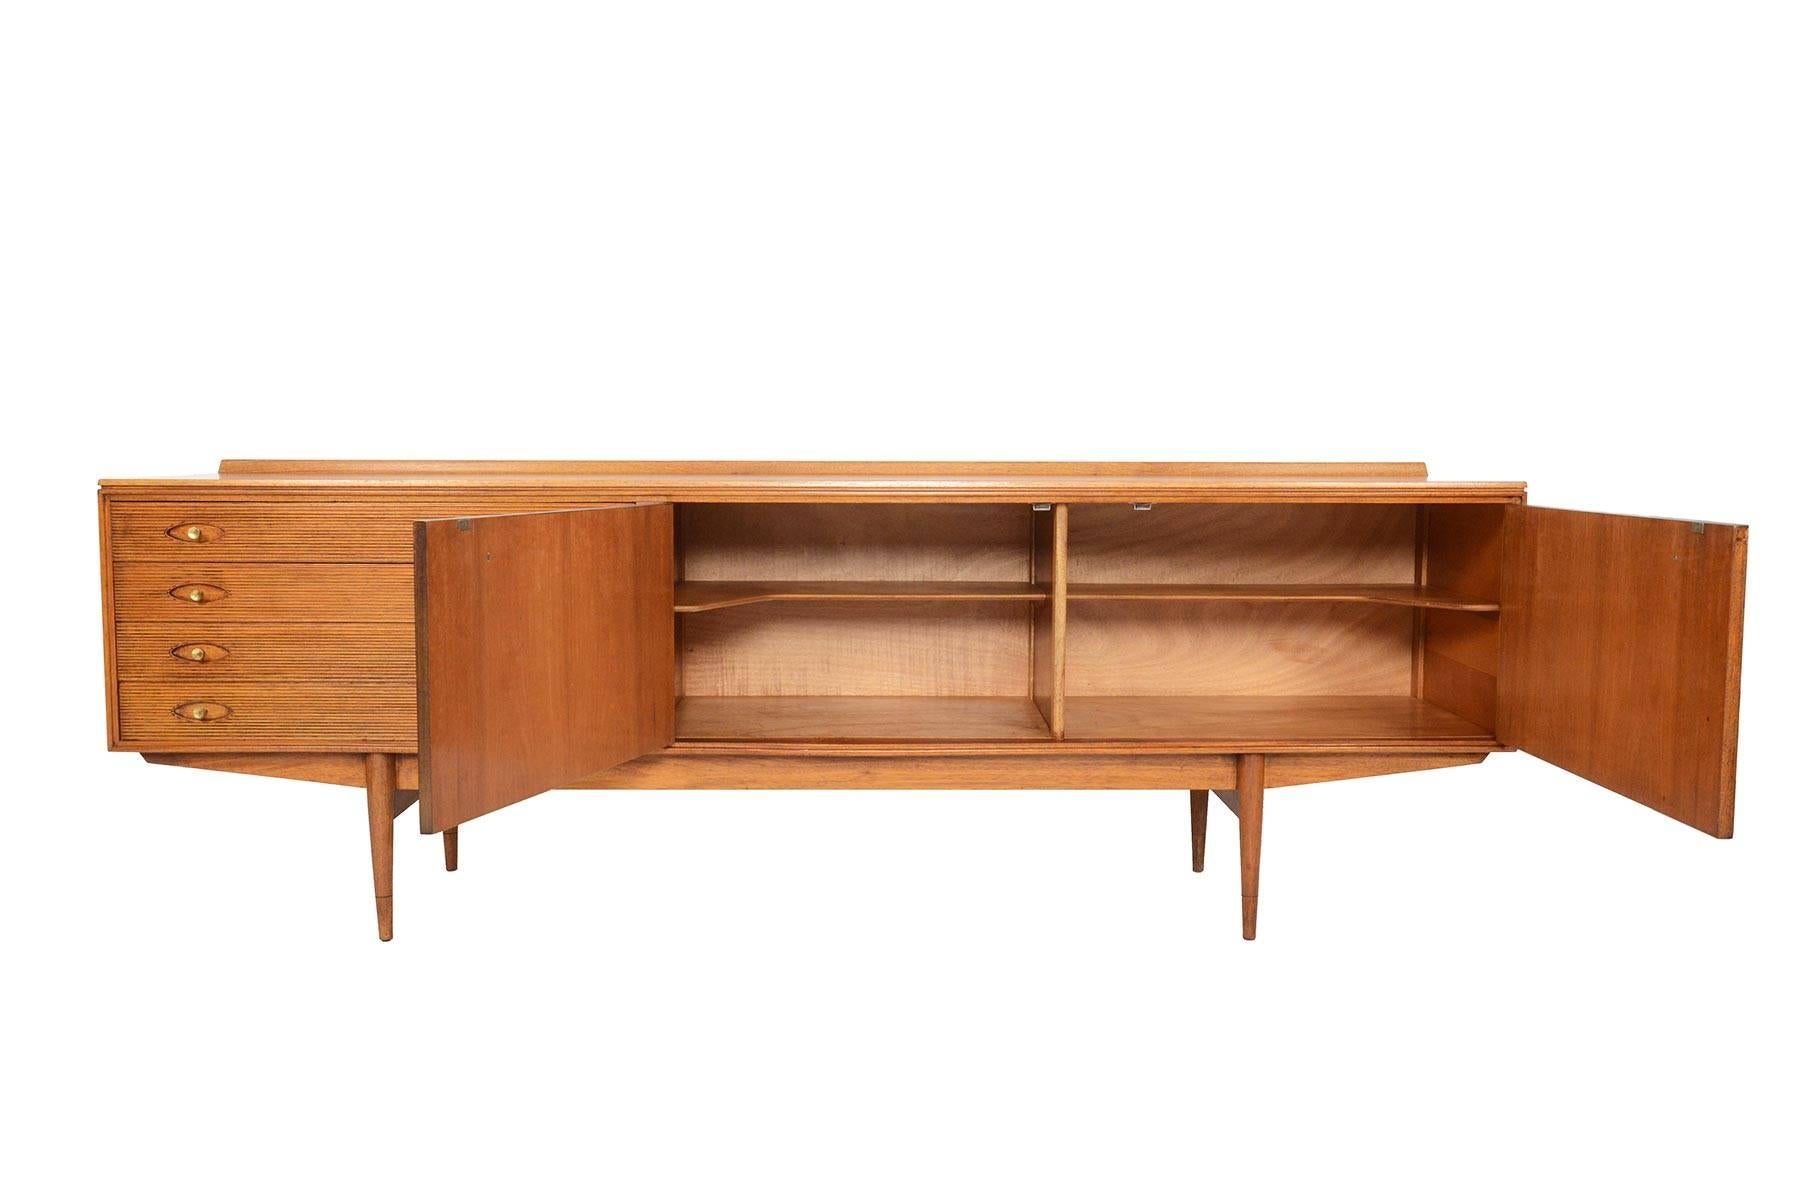 This long English modern credenza was designed by Robert Heritage for Archie Shine Furniture in 1957. Known as the “Hamilton” model, this beautiful piece is cased in mahogany with a curved lip in the back. Two rosewood doors open to reveal two bays